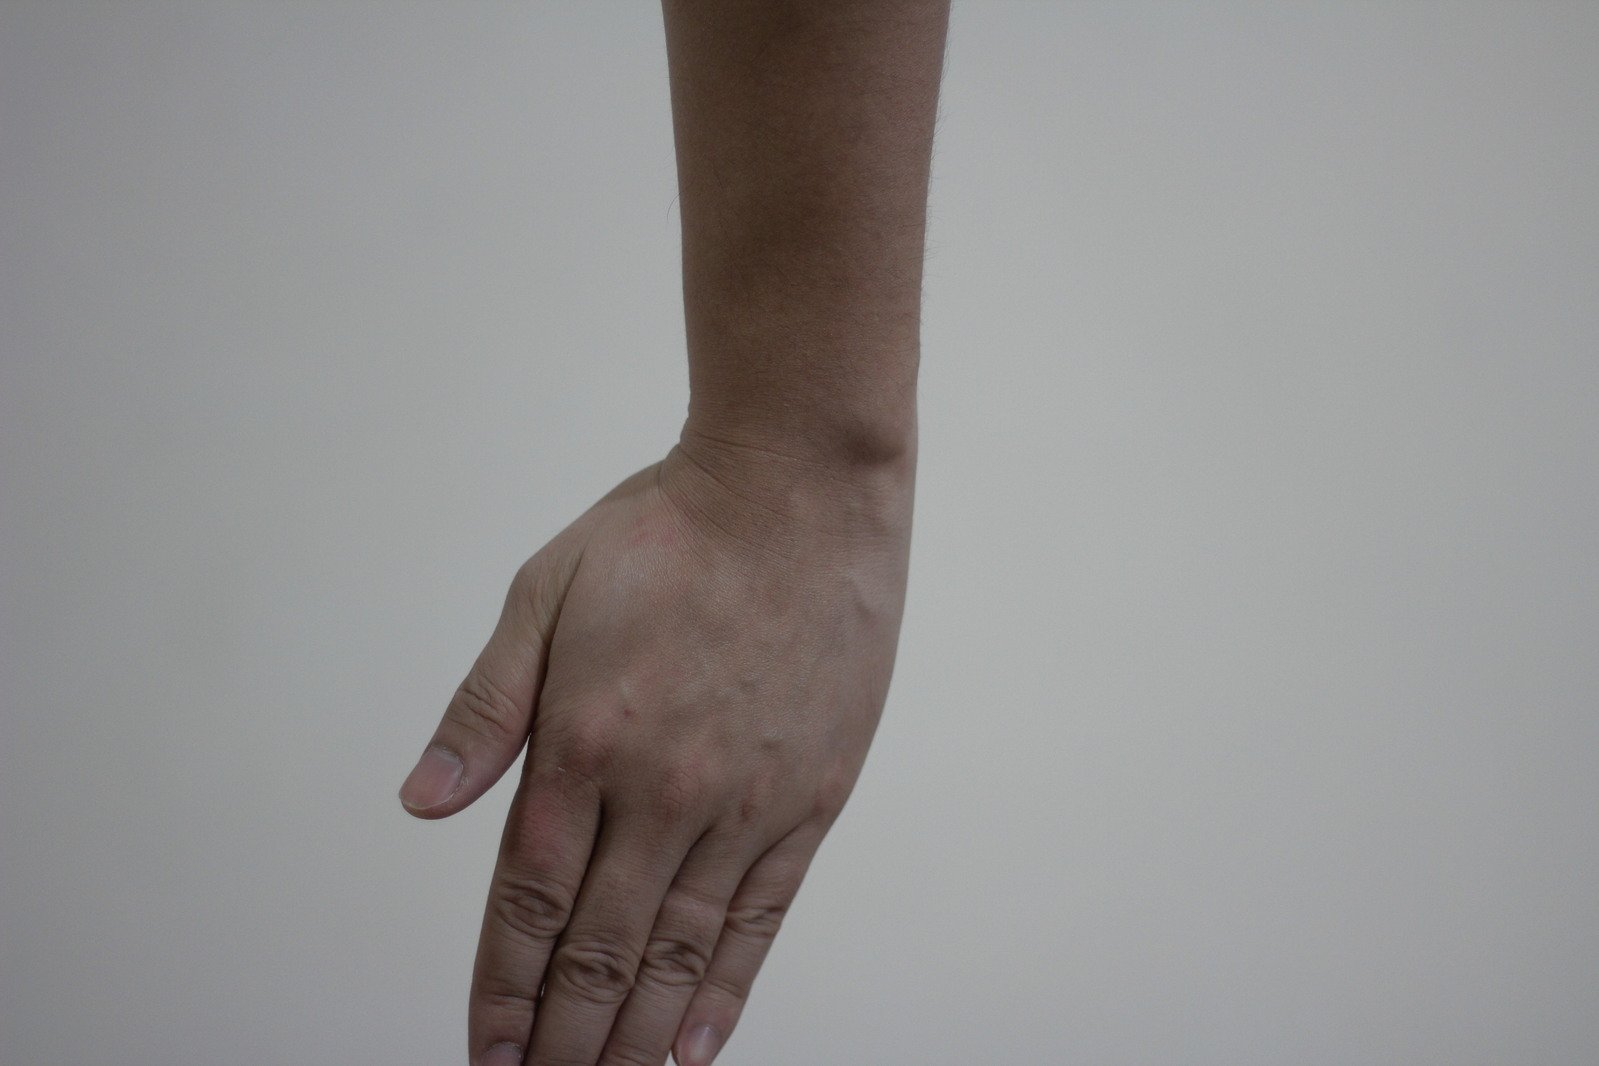 a person's hands reaching out towards the camera